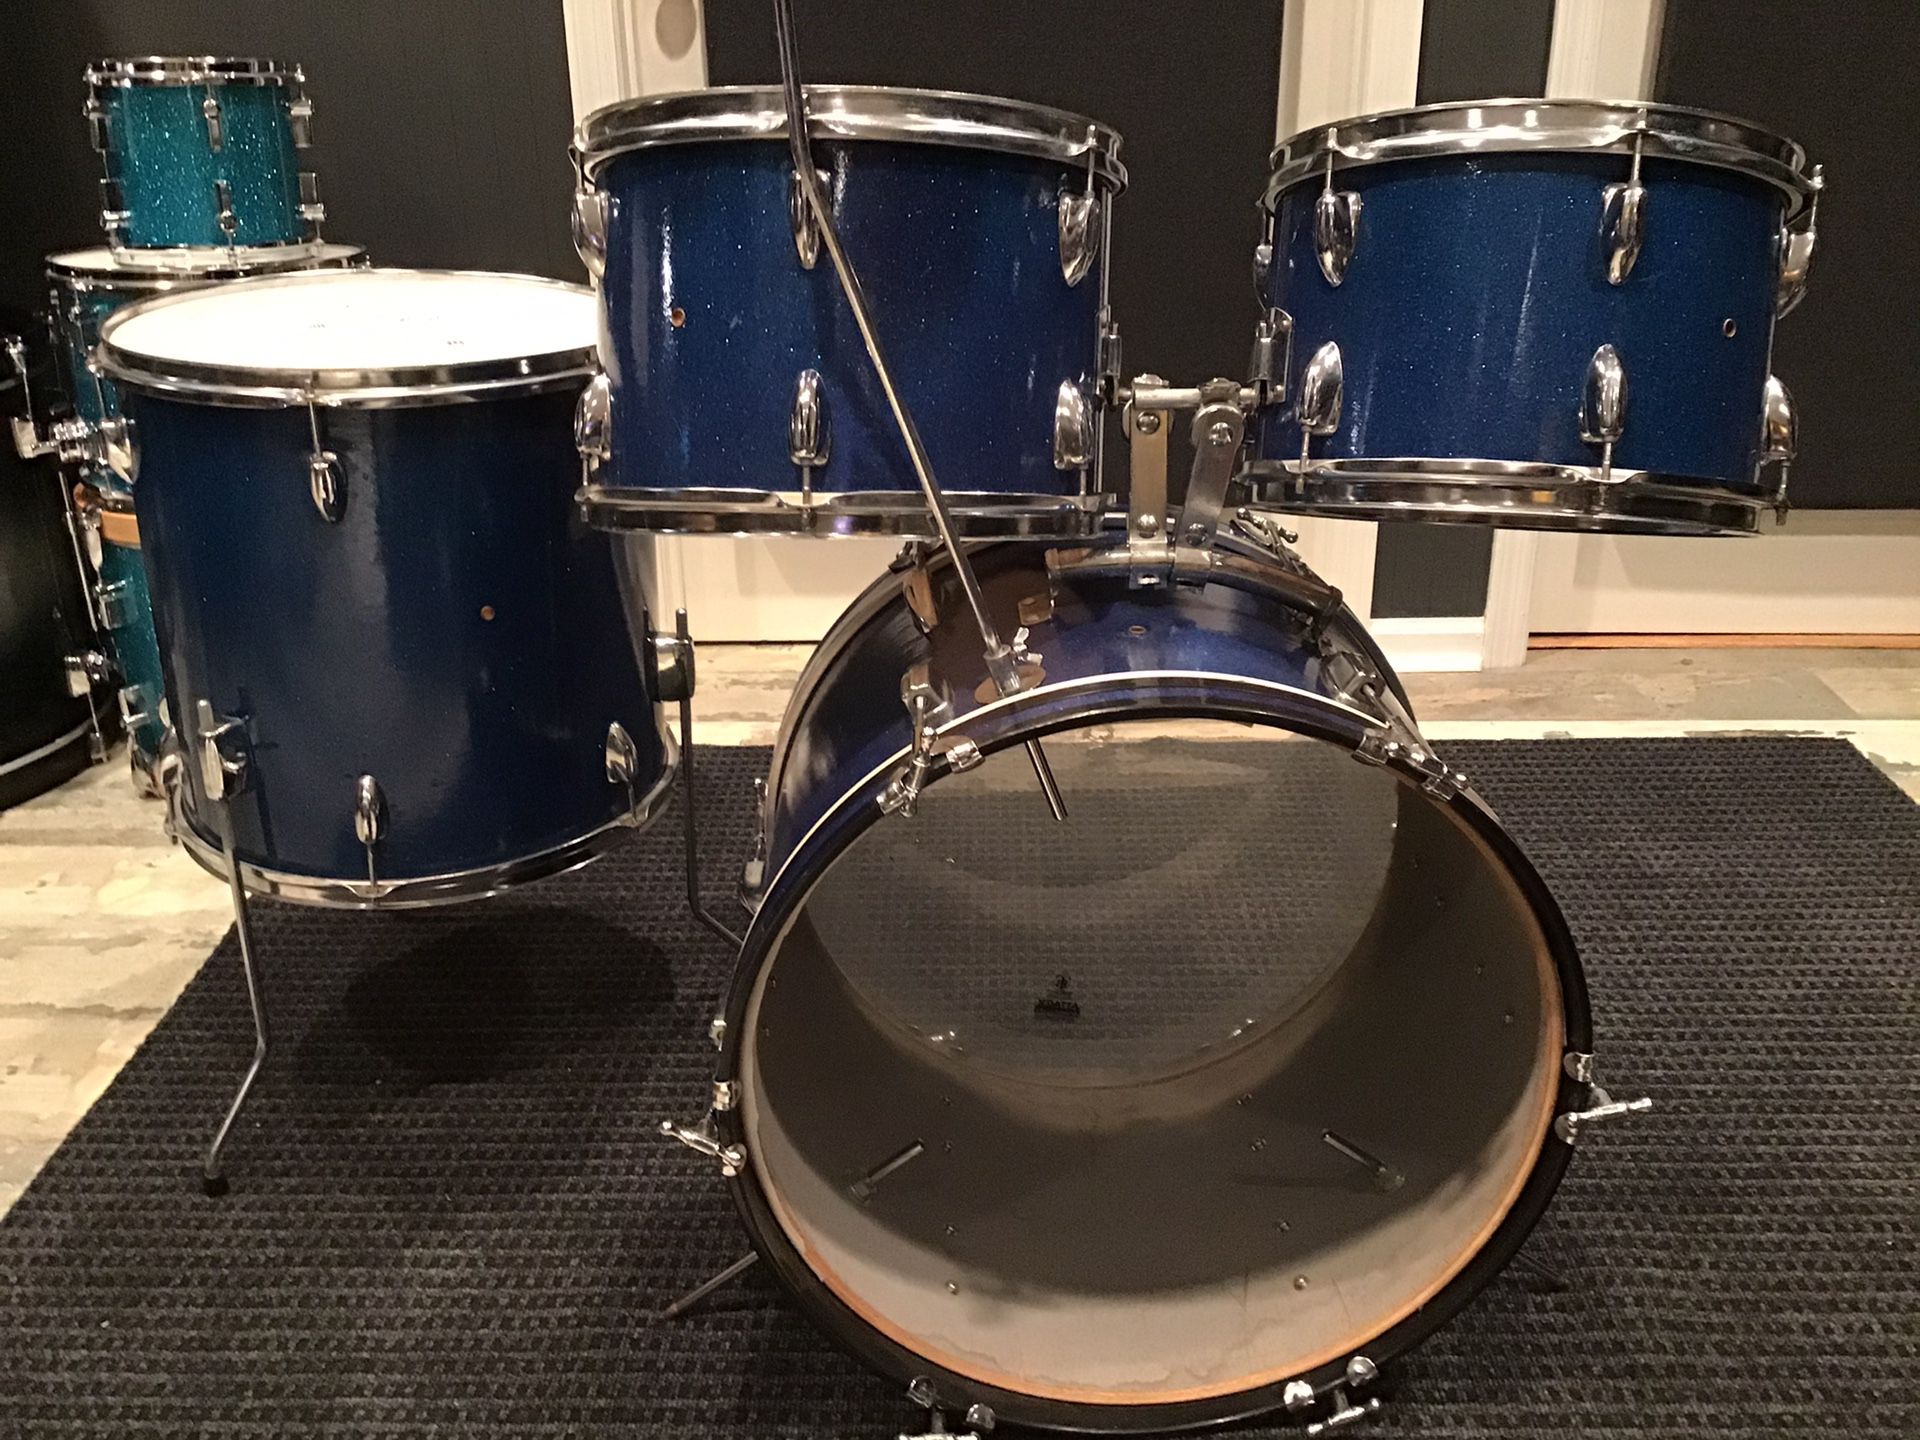 MIJ blue sparkle drum kit 12, 13, 16, 20. From the 60’s - 70’s